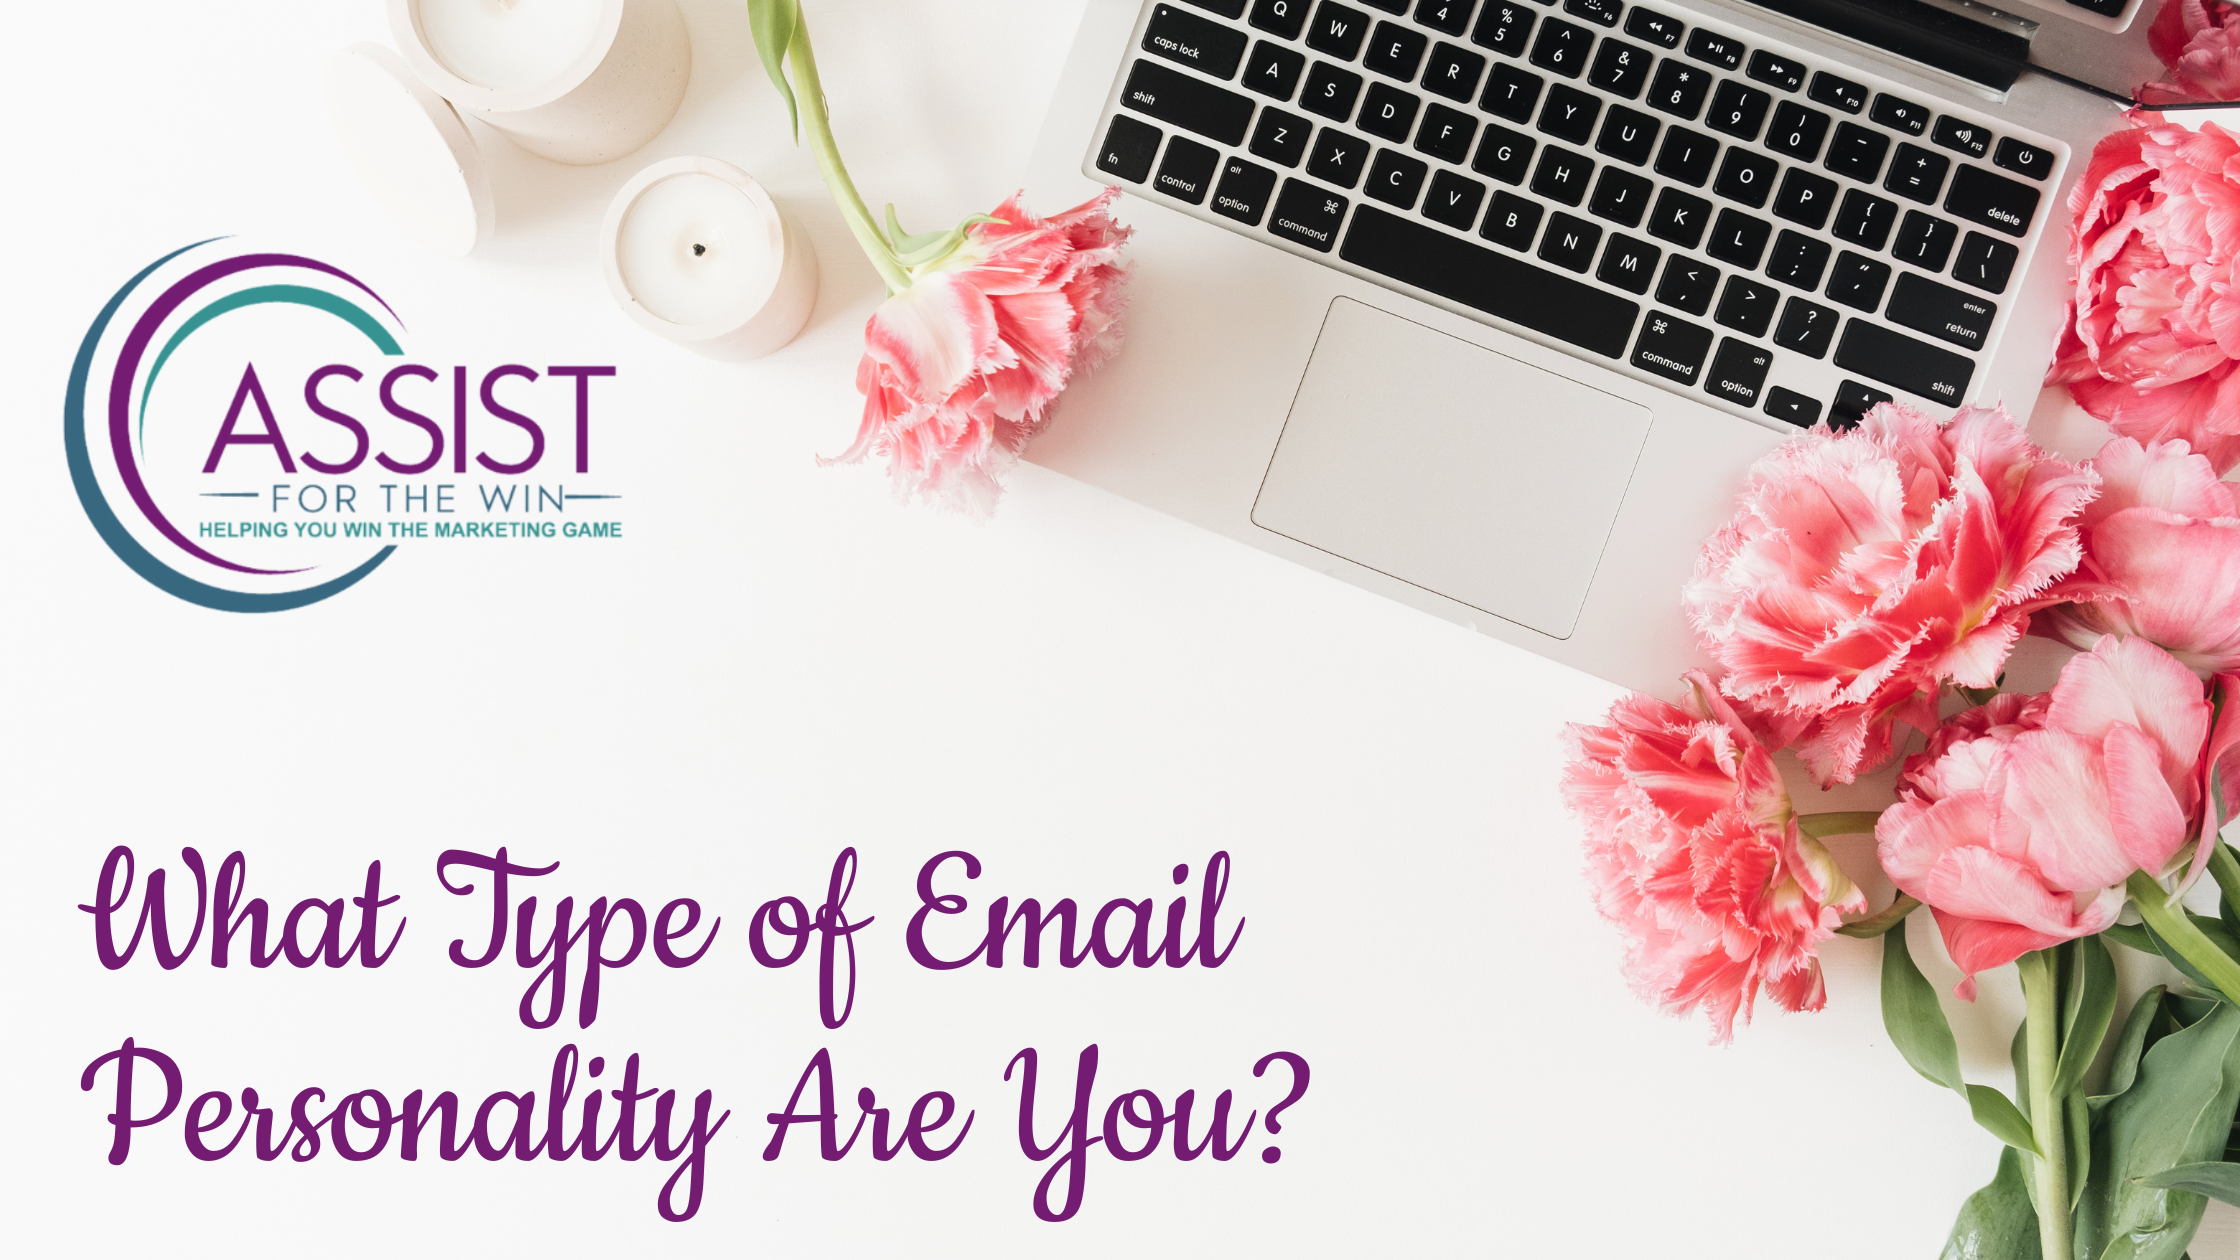 What Type of Email Personality Are You?